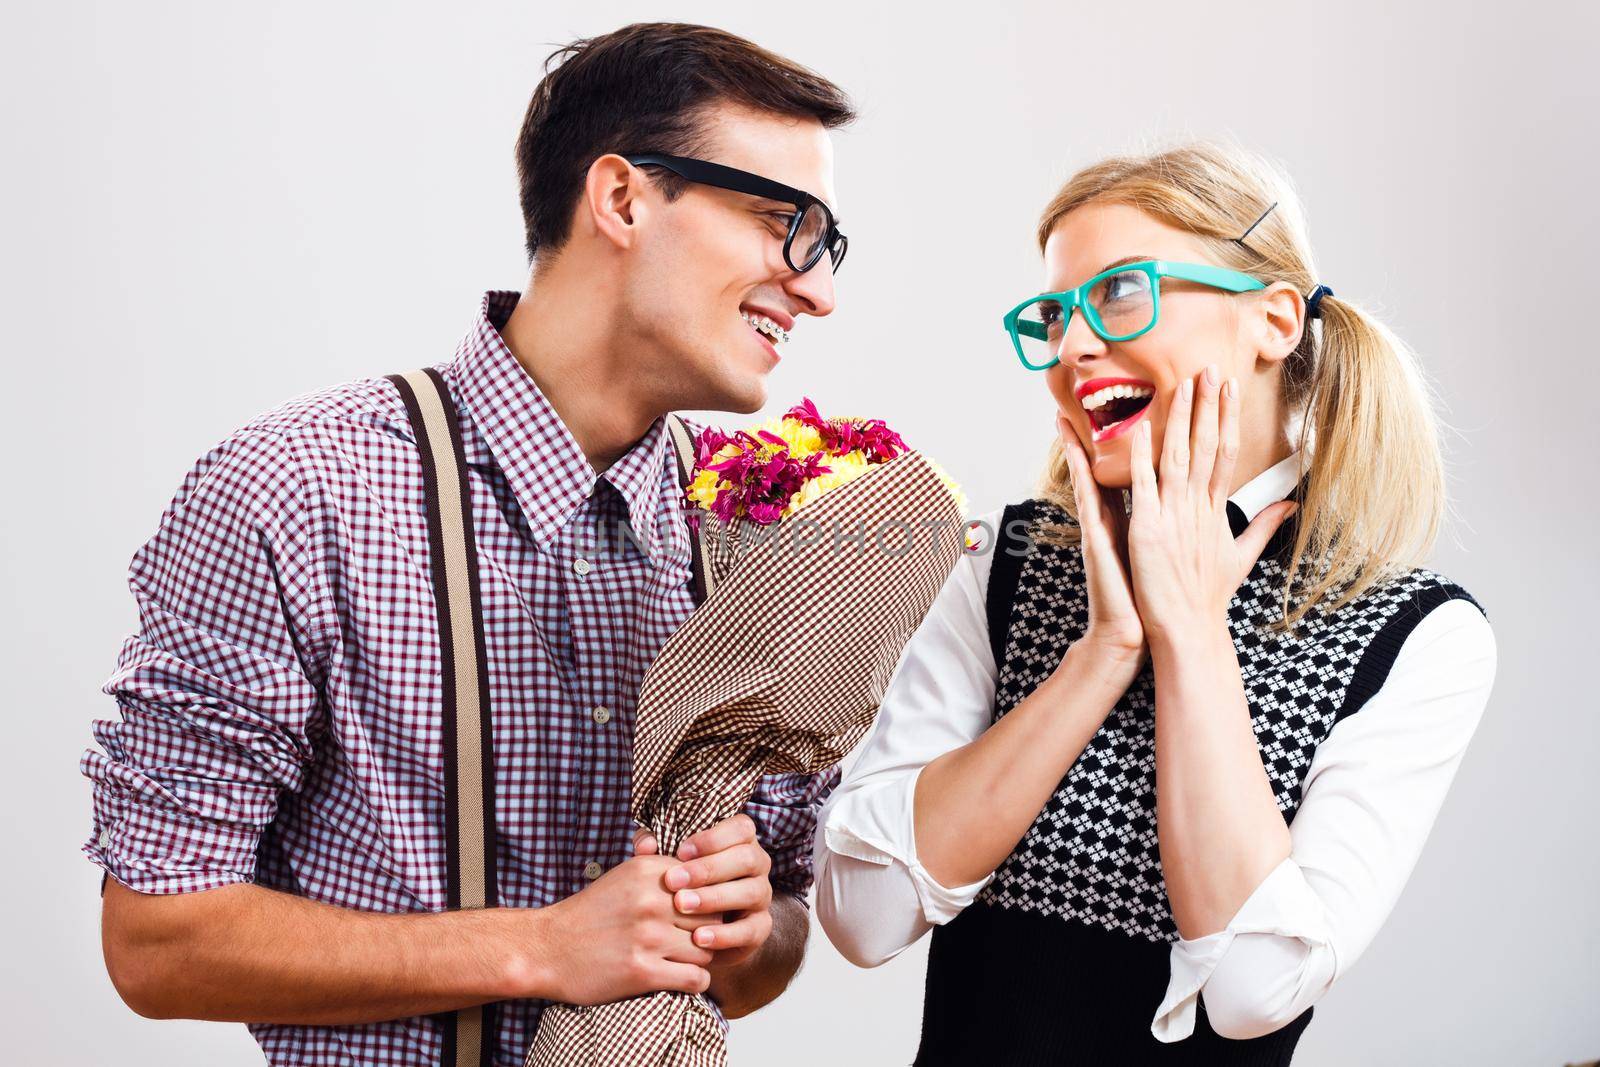 Romantic nerdy man is giving flowers to his nerdy lady.